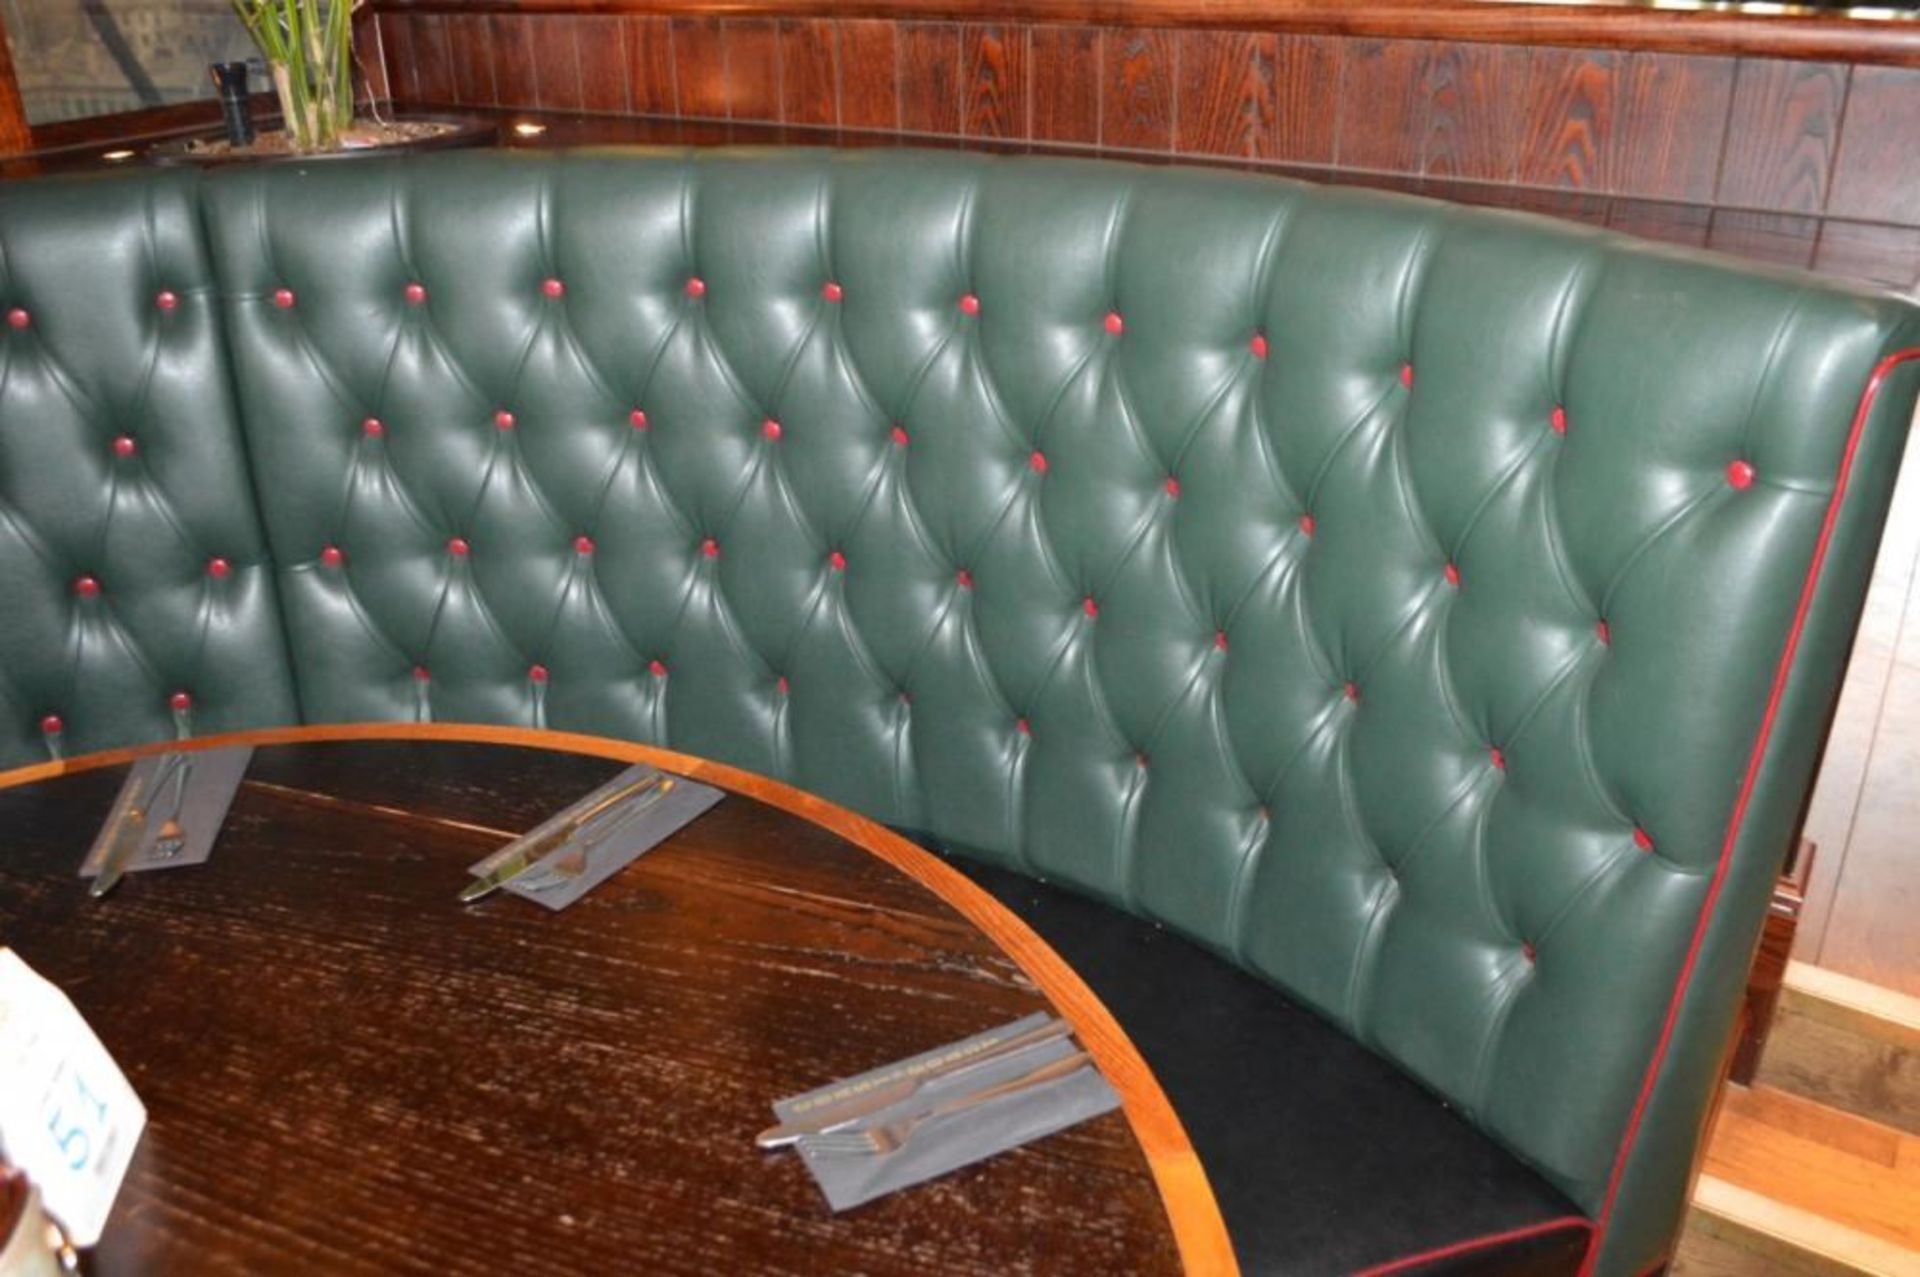 1 x Contemporary U Shape Seating Booth - Features a Leather Upholstery With Green Studded Backrests, - Image 4 of 10